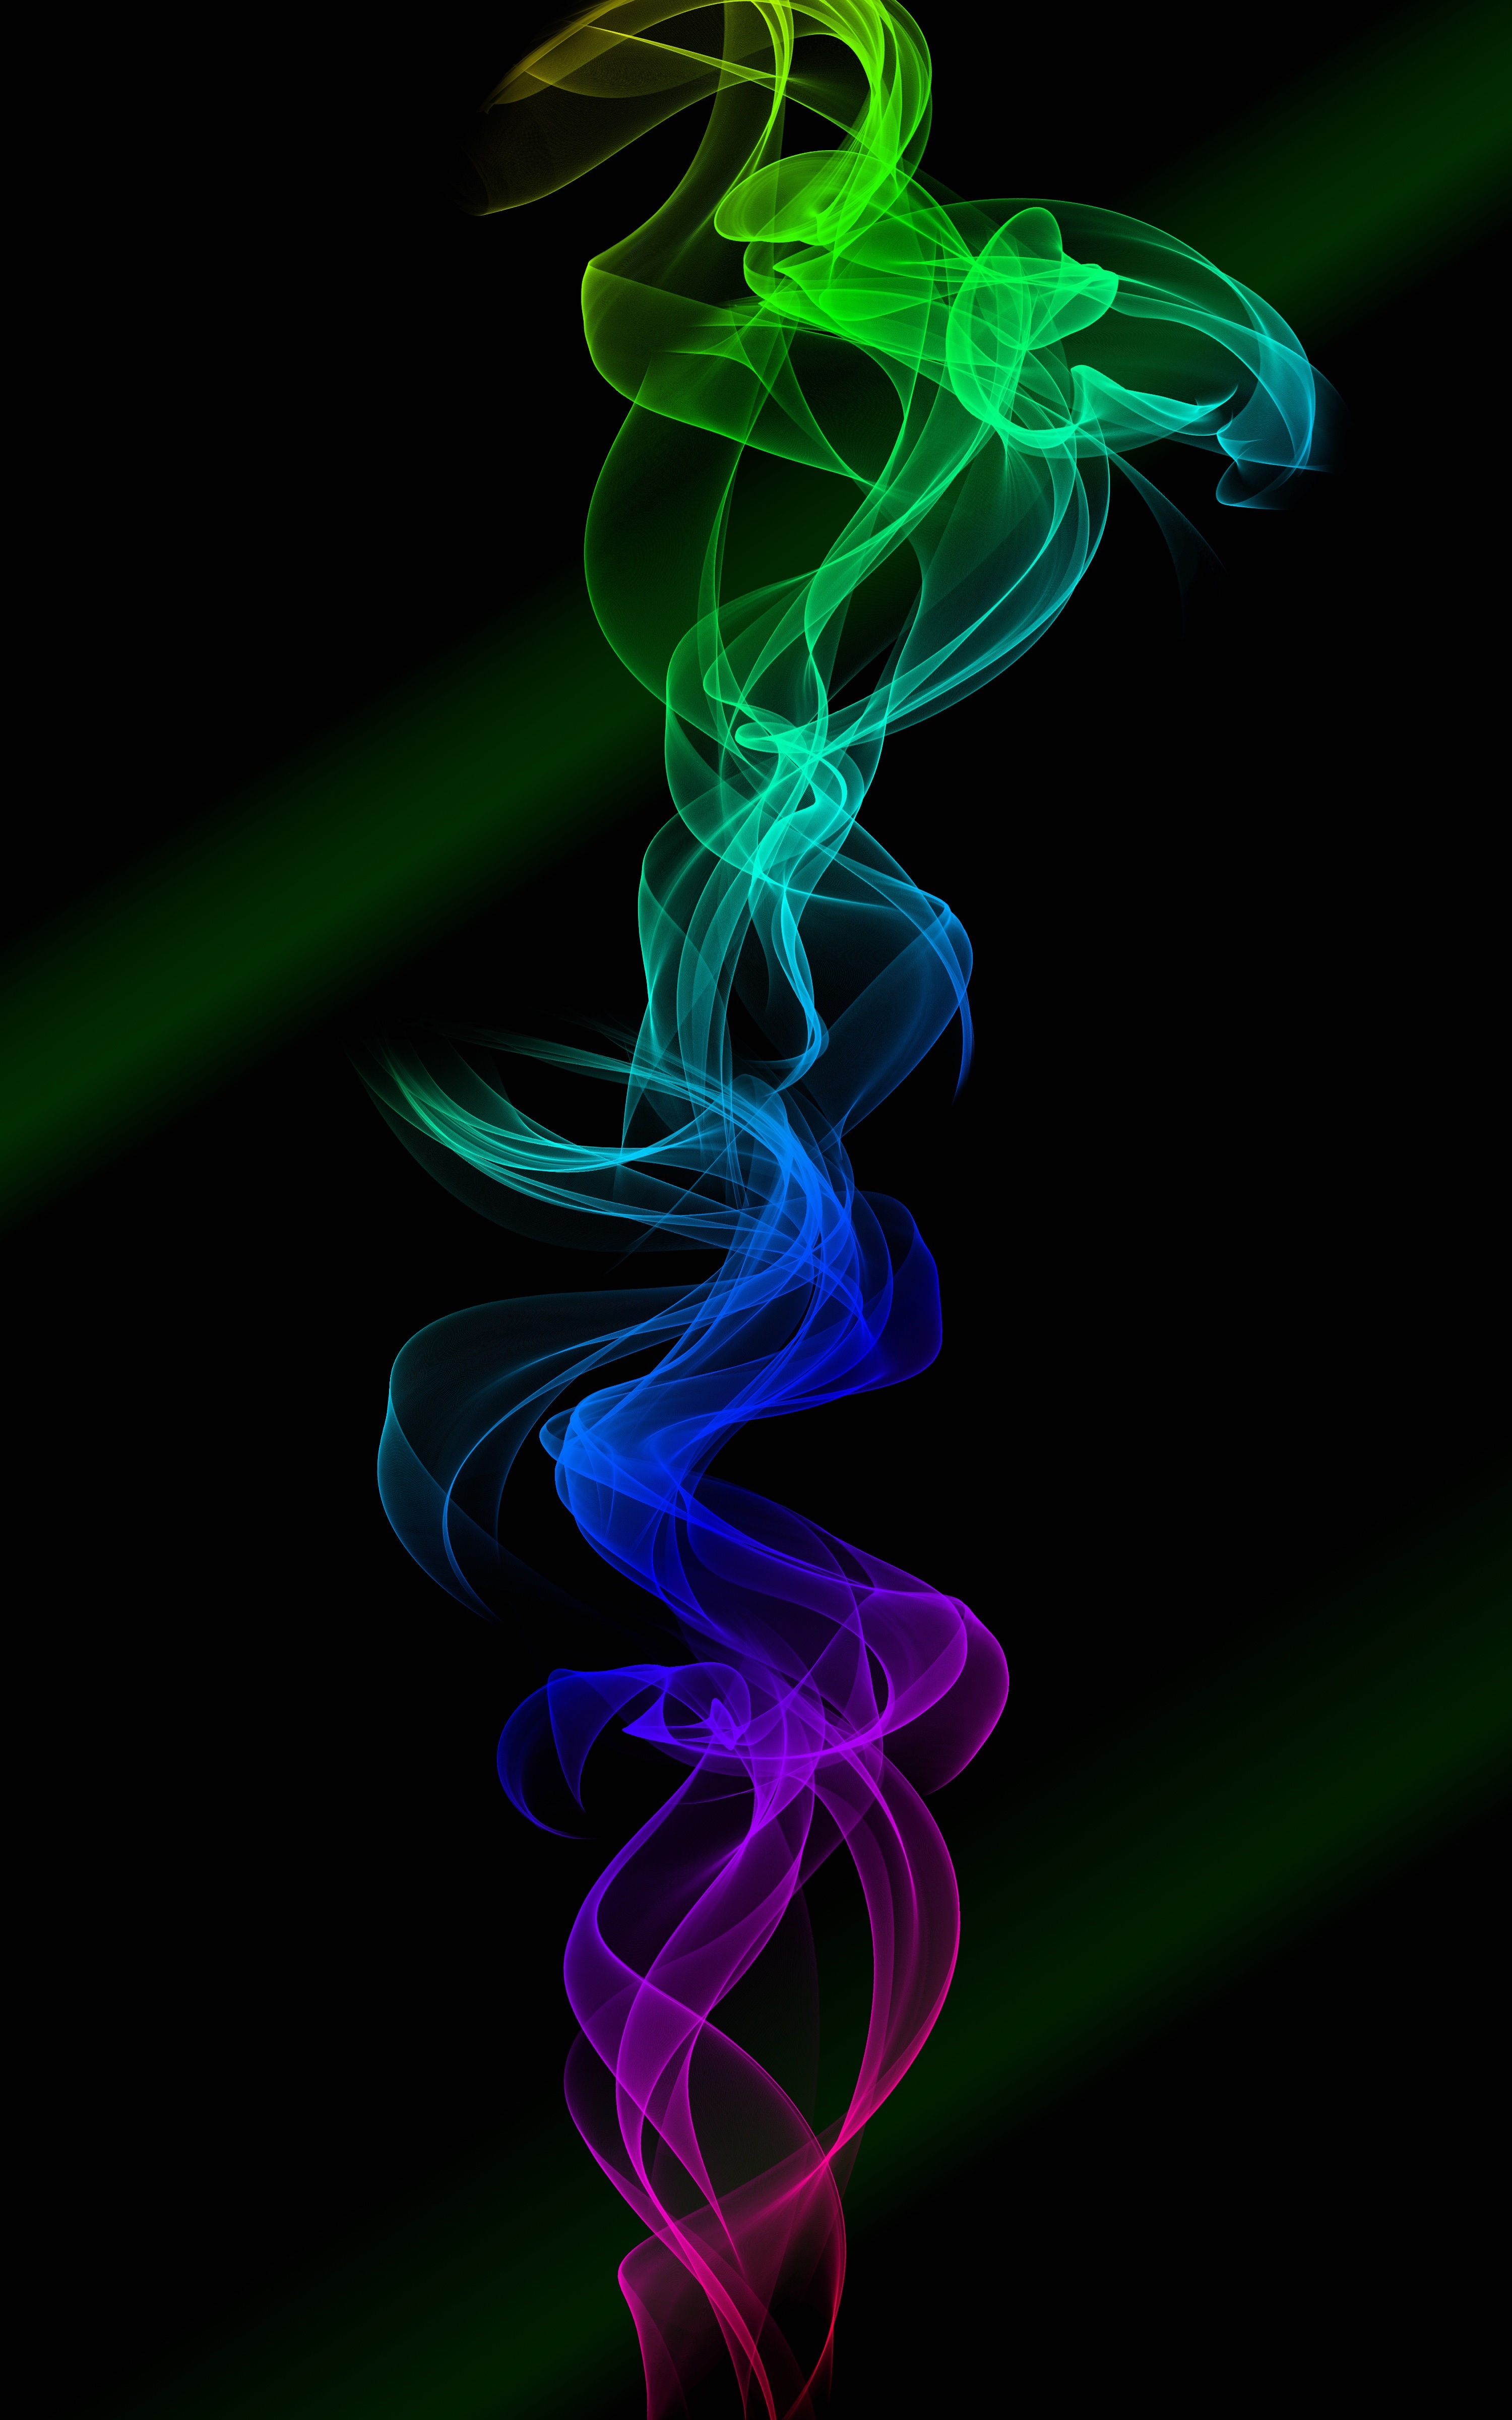 Mobile Wallpaper: Free HD Download [HQ] abstract, smoke, twisted, multicolored